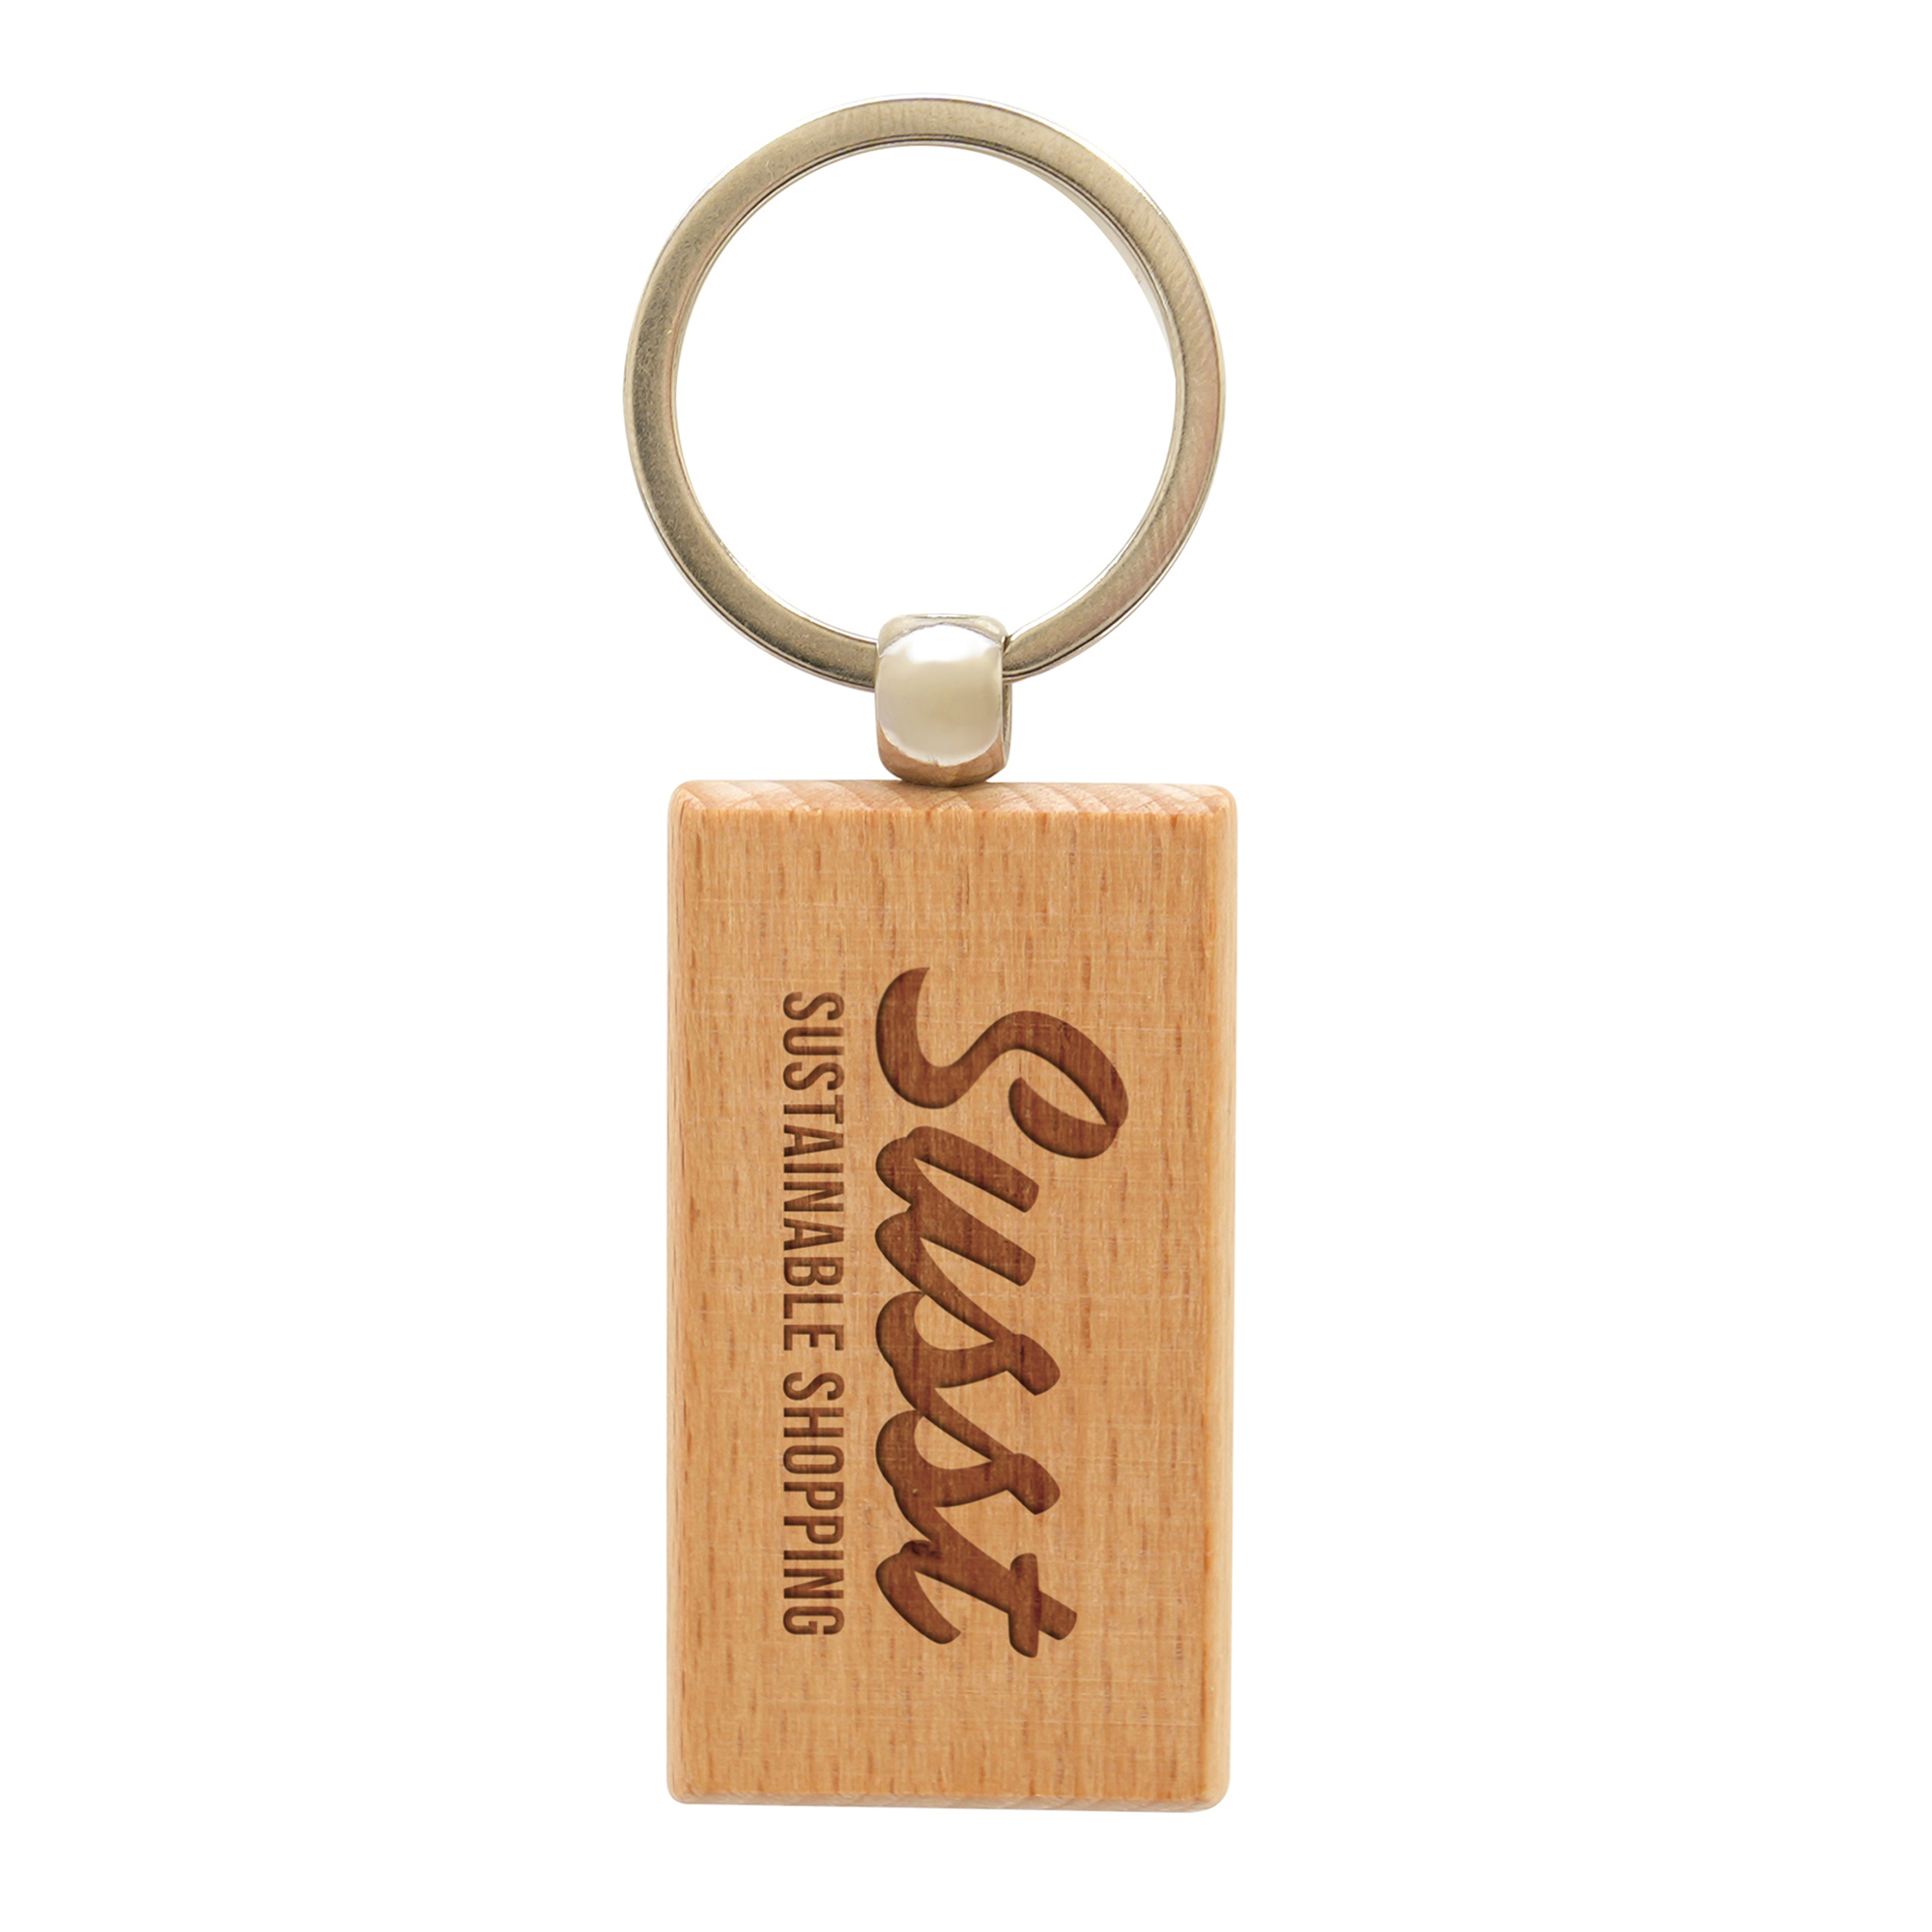 Wooden keyring with modern split ring attachment in a modern silver finish. Choose from circular or rectangular shapes.